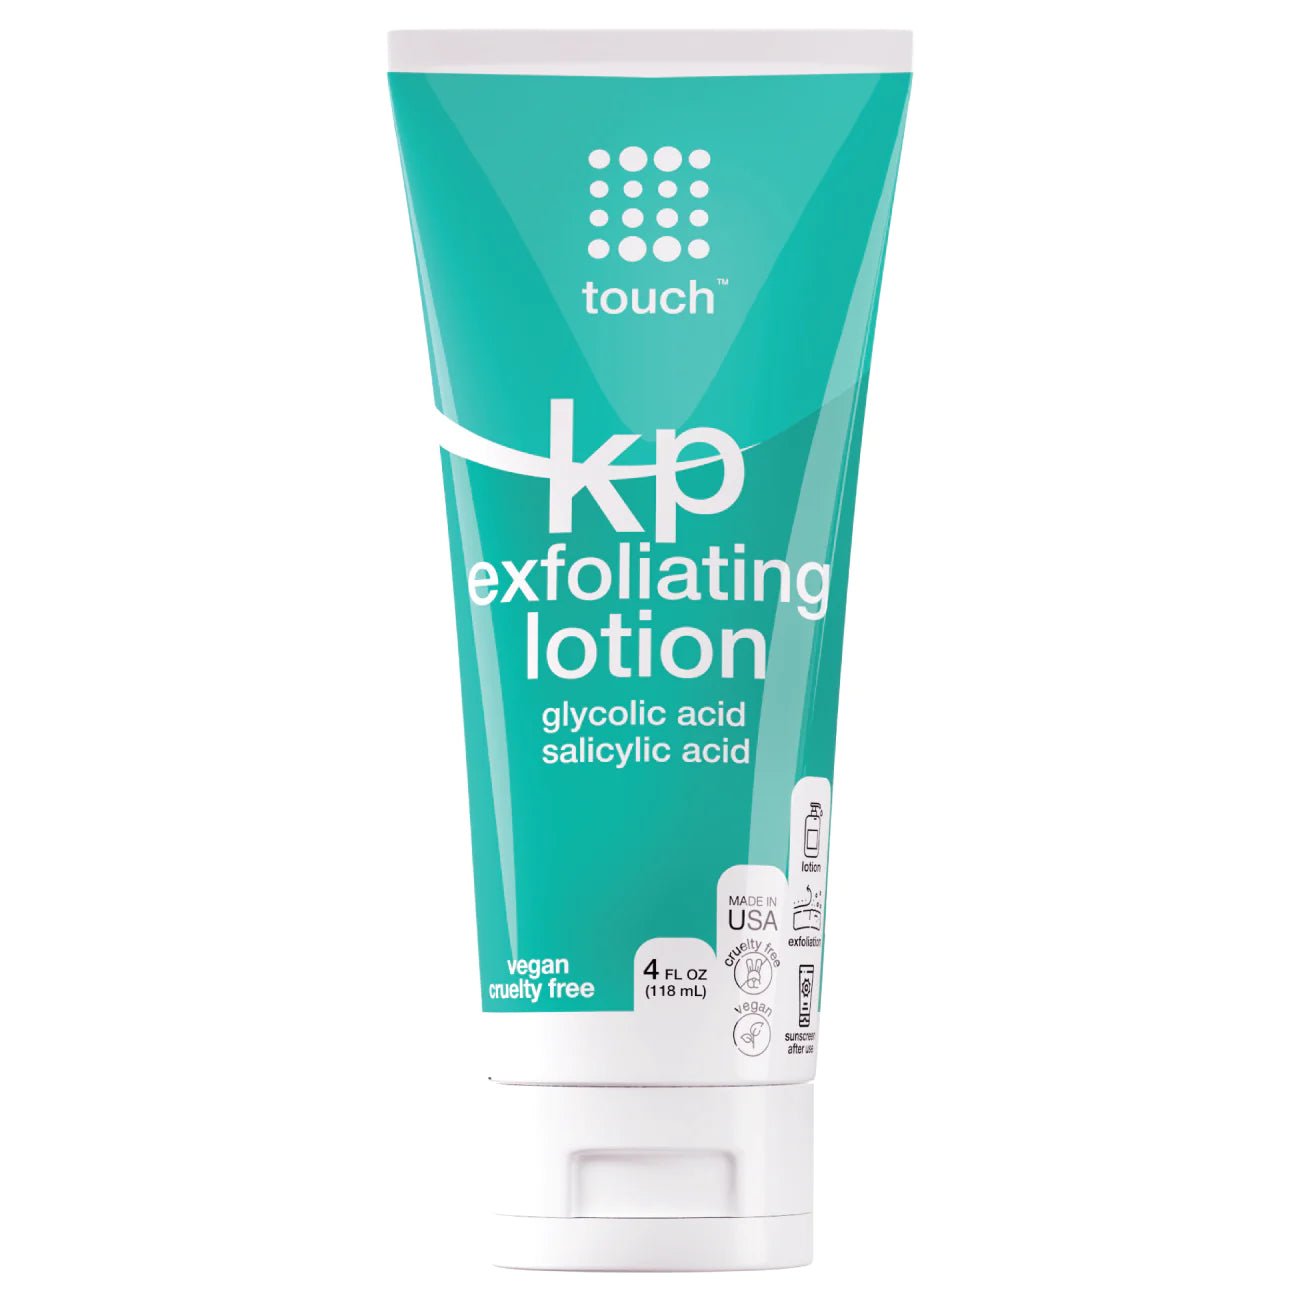 Buy Touch KP exfoliating lotion in Nigeria 118ml